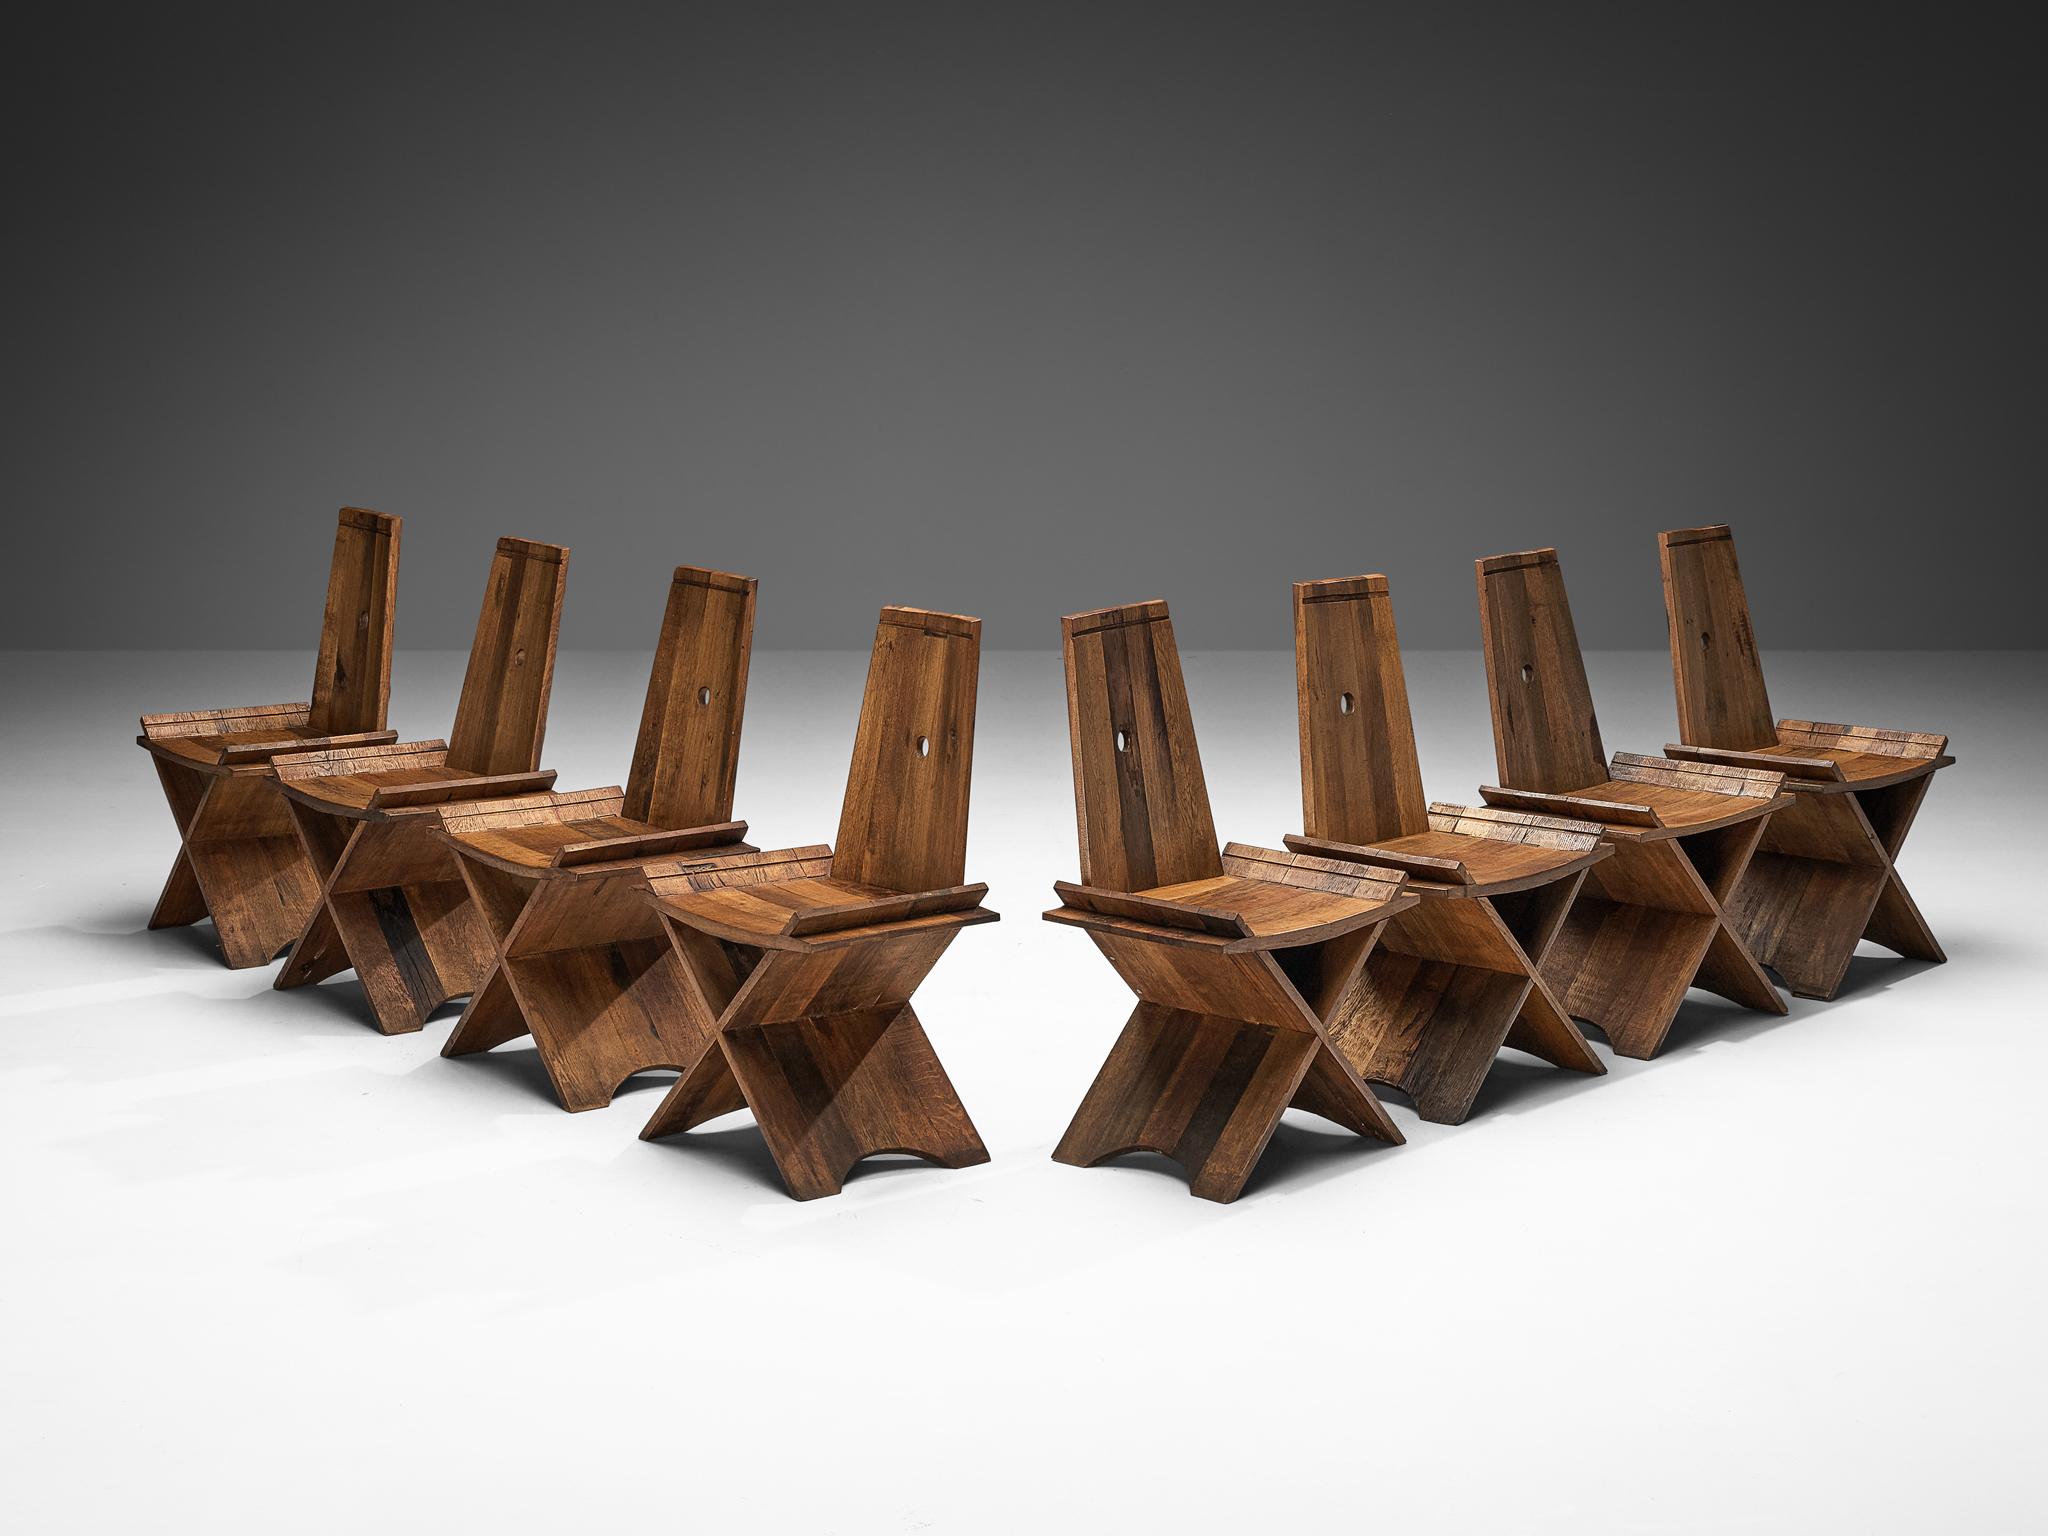 Set of eight dining chairs, oak, iron, Europe, 1970s

These chairs exemplify a harmonious synthesis, seamlessly blending the robustness inherent in Brutalist style with the understated simplicity characteristic of rustic design. The backrest is